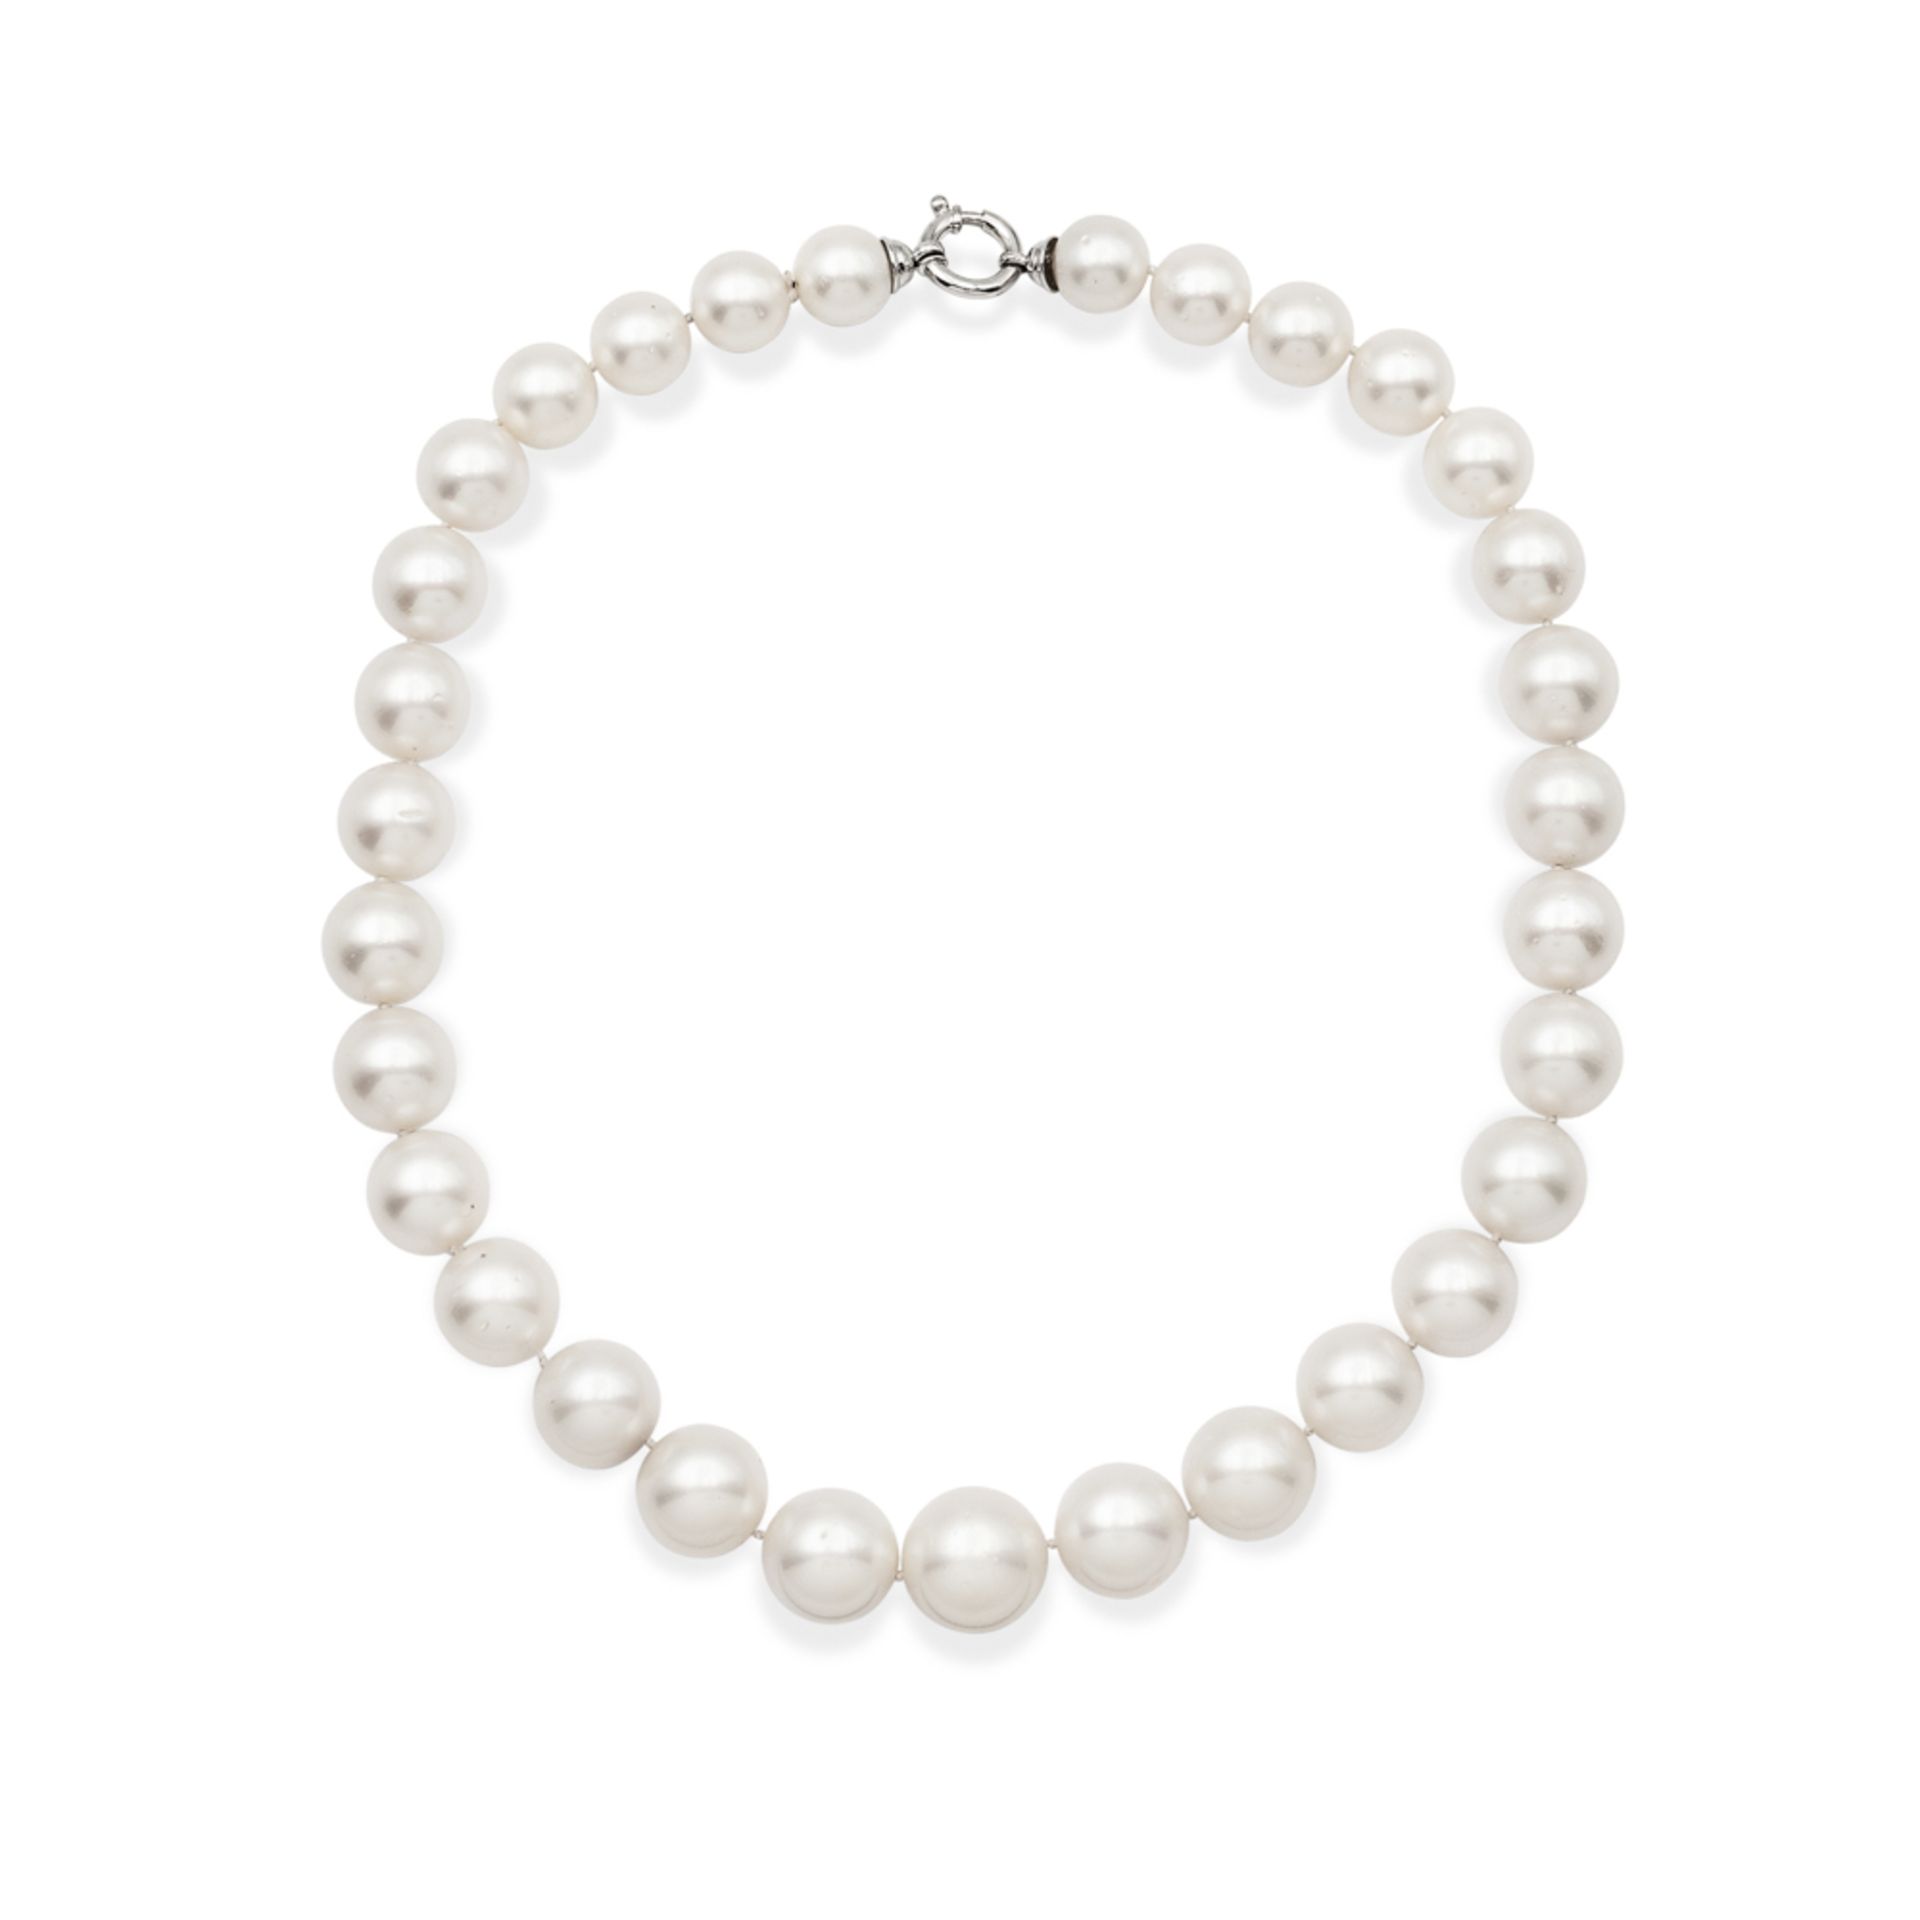 One strand of South Sea pearl necklace weight 127,7 gr.